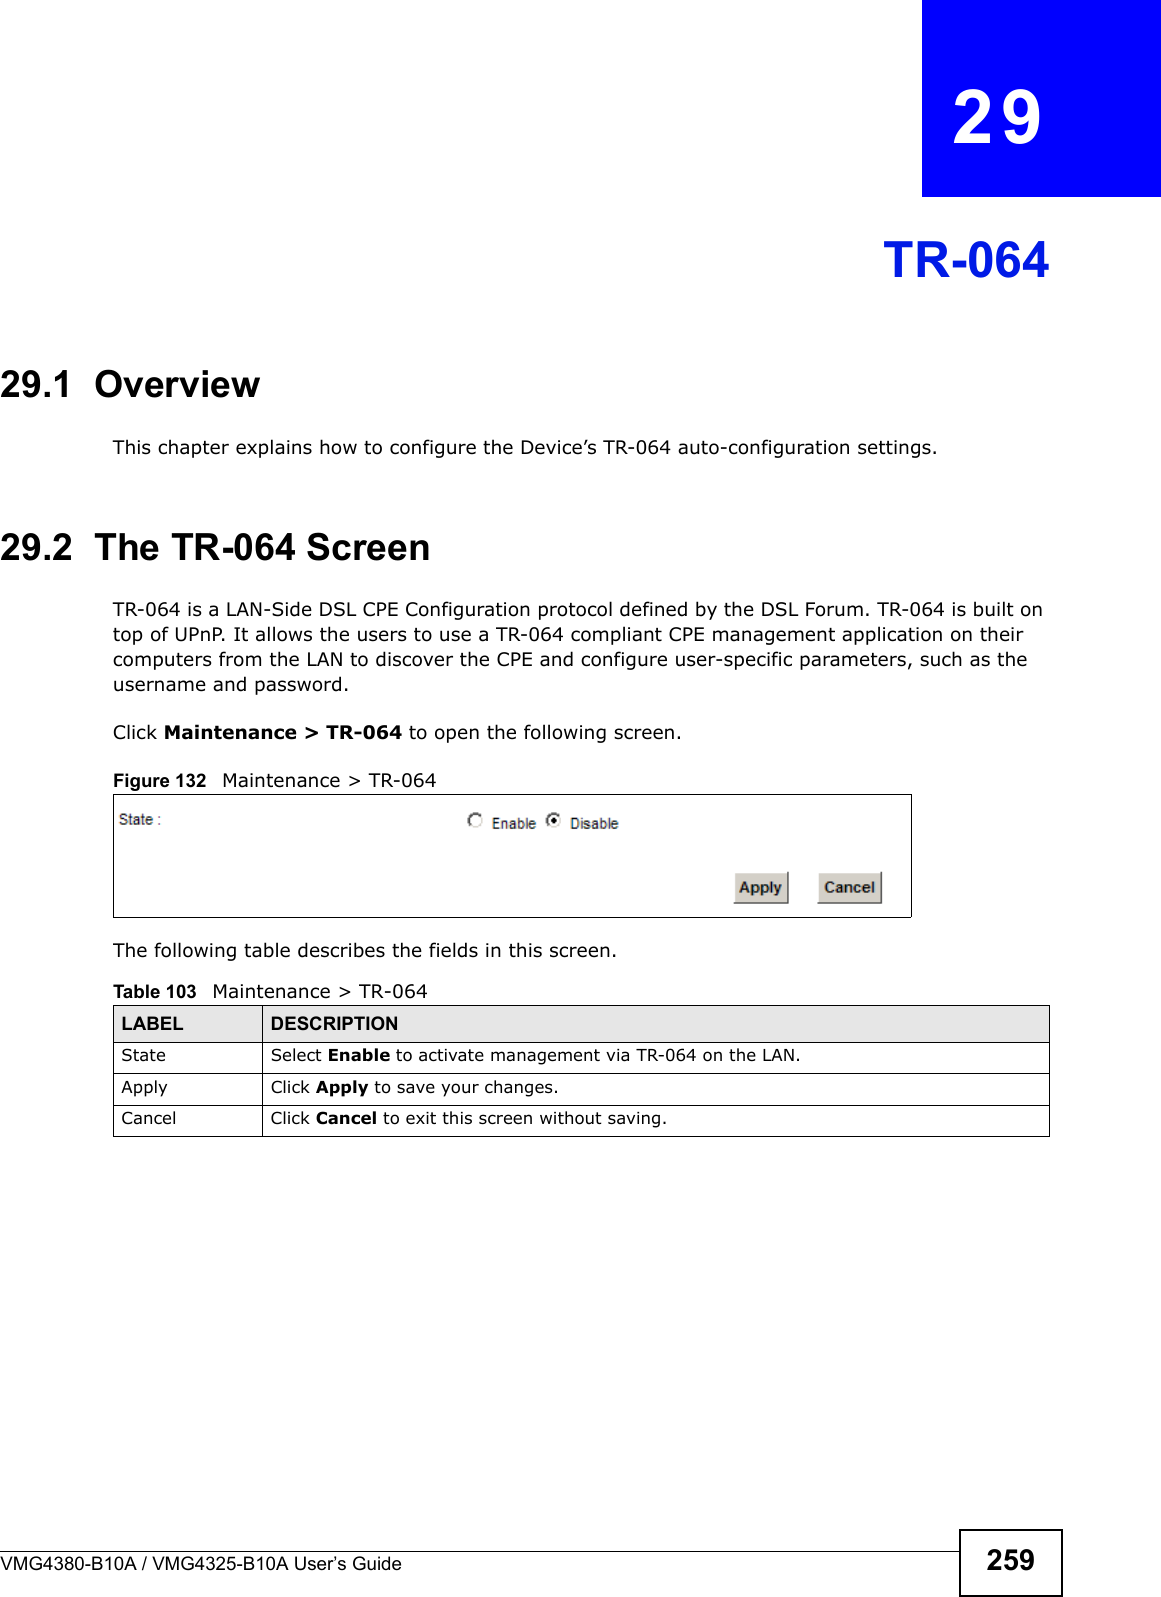 VMG4380-B10A / VMG4325-B10A User’s Guide 259CHAPTER  29TR-06429.1  OverviewThis chapter explains how to configure the Device’s TR-064 auto-configuration settings.29.2  The TR-064 ScreenTR-064 is a LAN-Side DSL CPE Configuration protocol defined by the DSL Forum. TR-064 is built on top of UPnP. It allows the users to use a TR-064 compliant CPE management application on their computers from the LAN to discover the CPE and configure user-specific parameters, such as the username and password.Click Maintenance &gt; TR-064 to open the following screen. Figure 132  Maintenance &gt; TR-064 The following table describes the fields in this screen. Table 103   Maintenance &gt; TR-064LABEL DESCRIPTIONState Select Enable to activate management via TR-064 on the LAN.Apply Click Apply to save your changes.Cancel Click Cancel to exit this screen without saving.